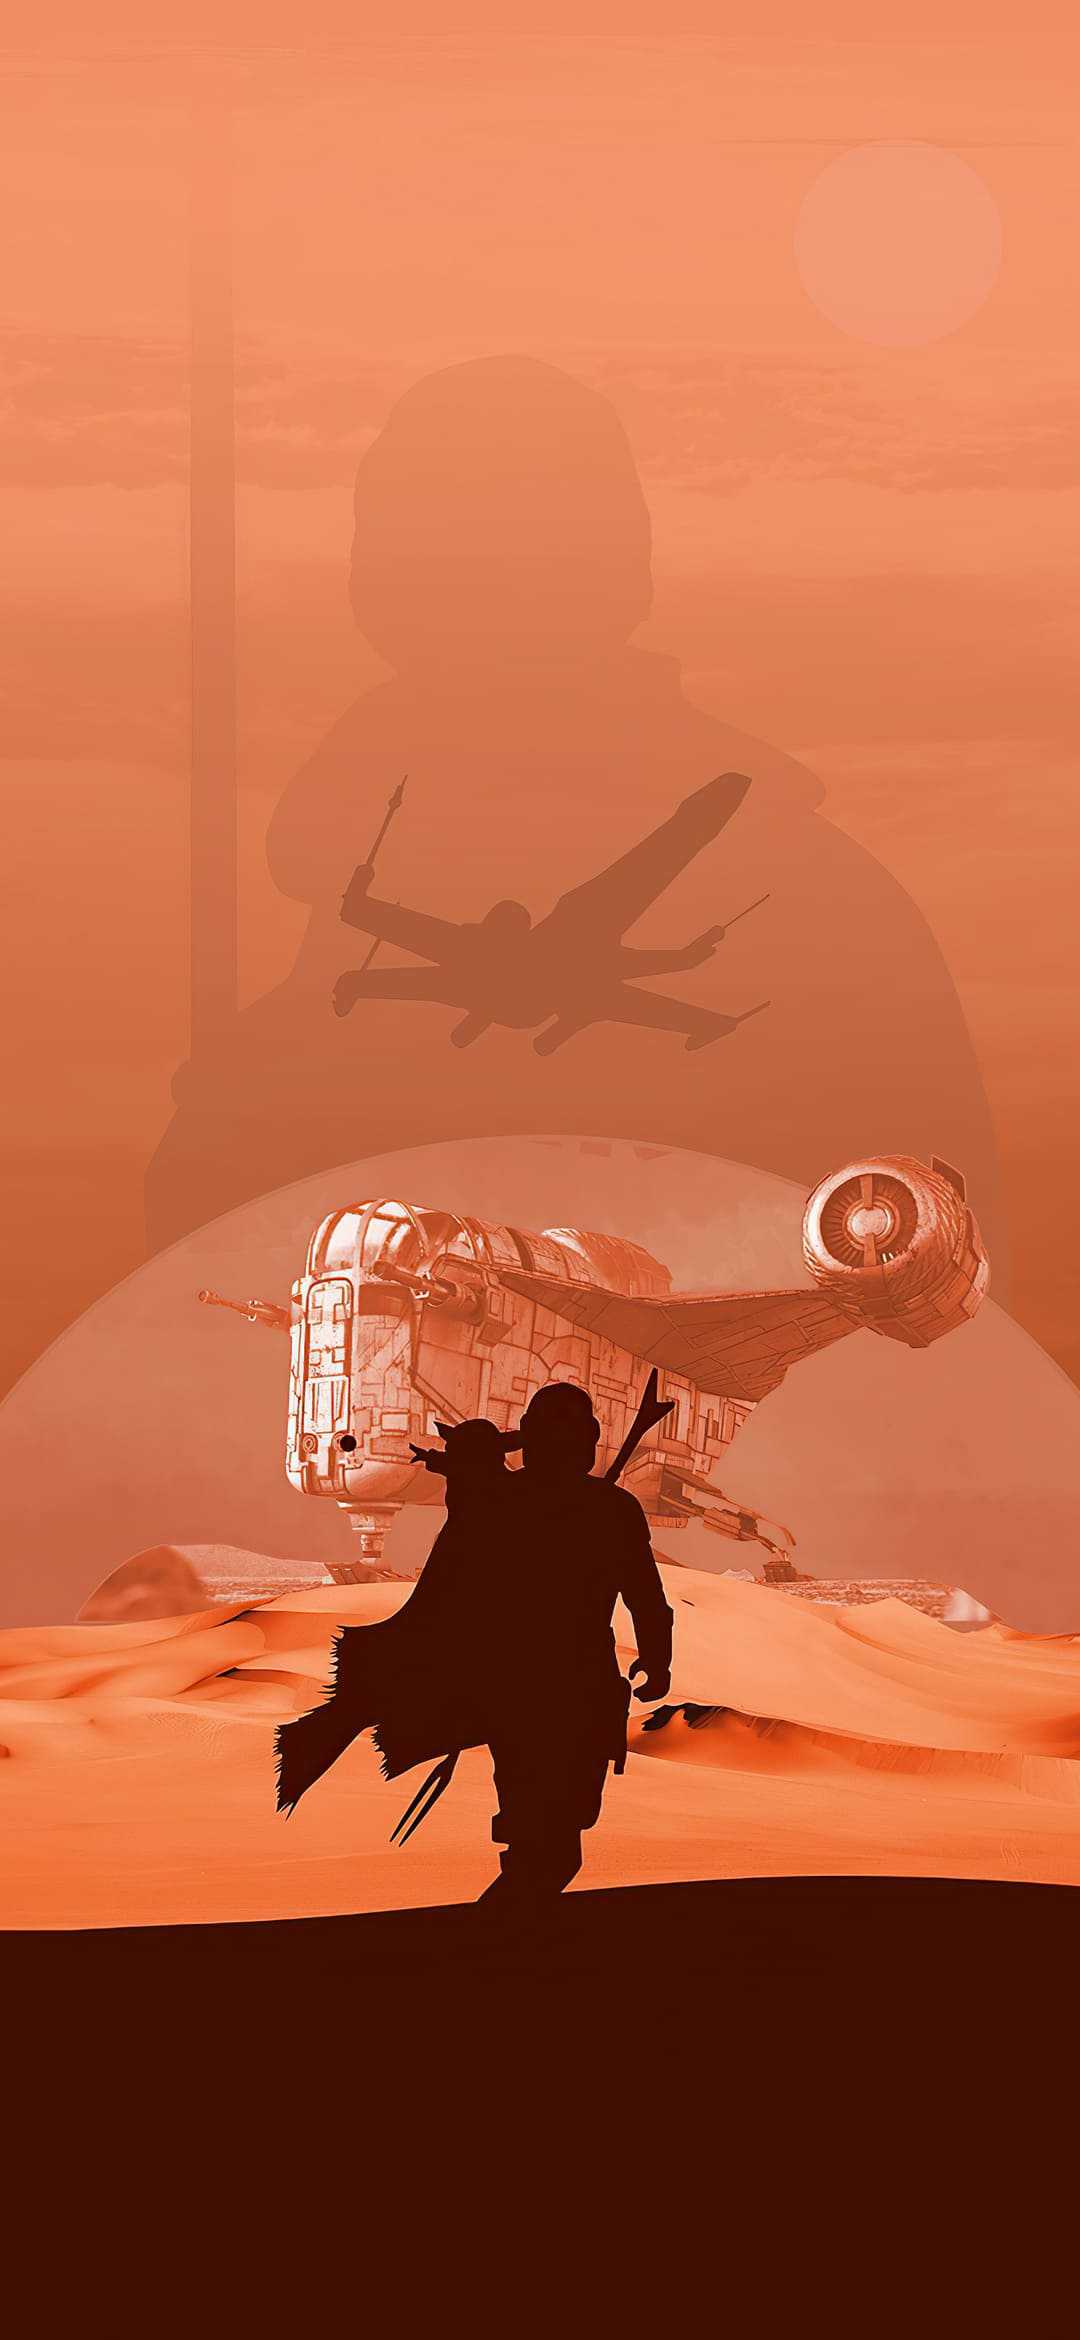 A man walking through the desert with an airplane in background - Star Wars, Darth Vader